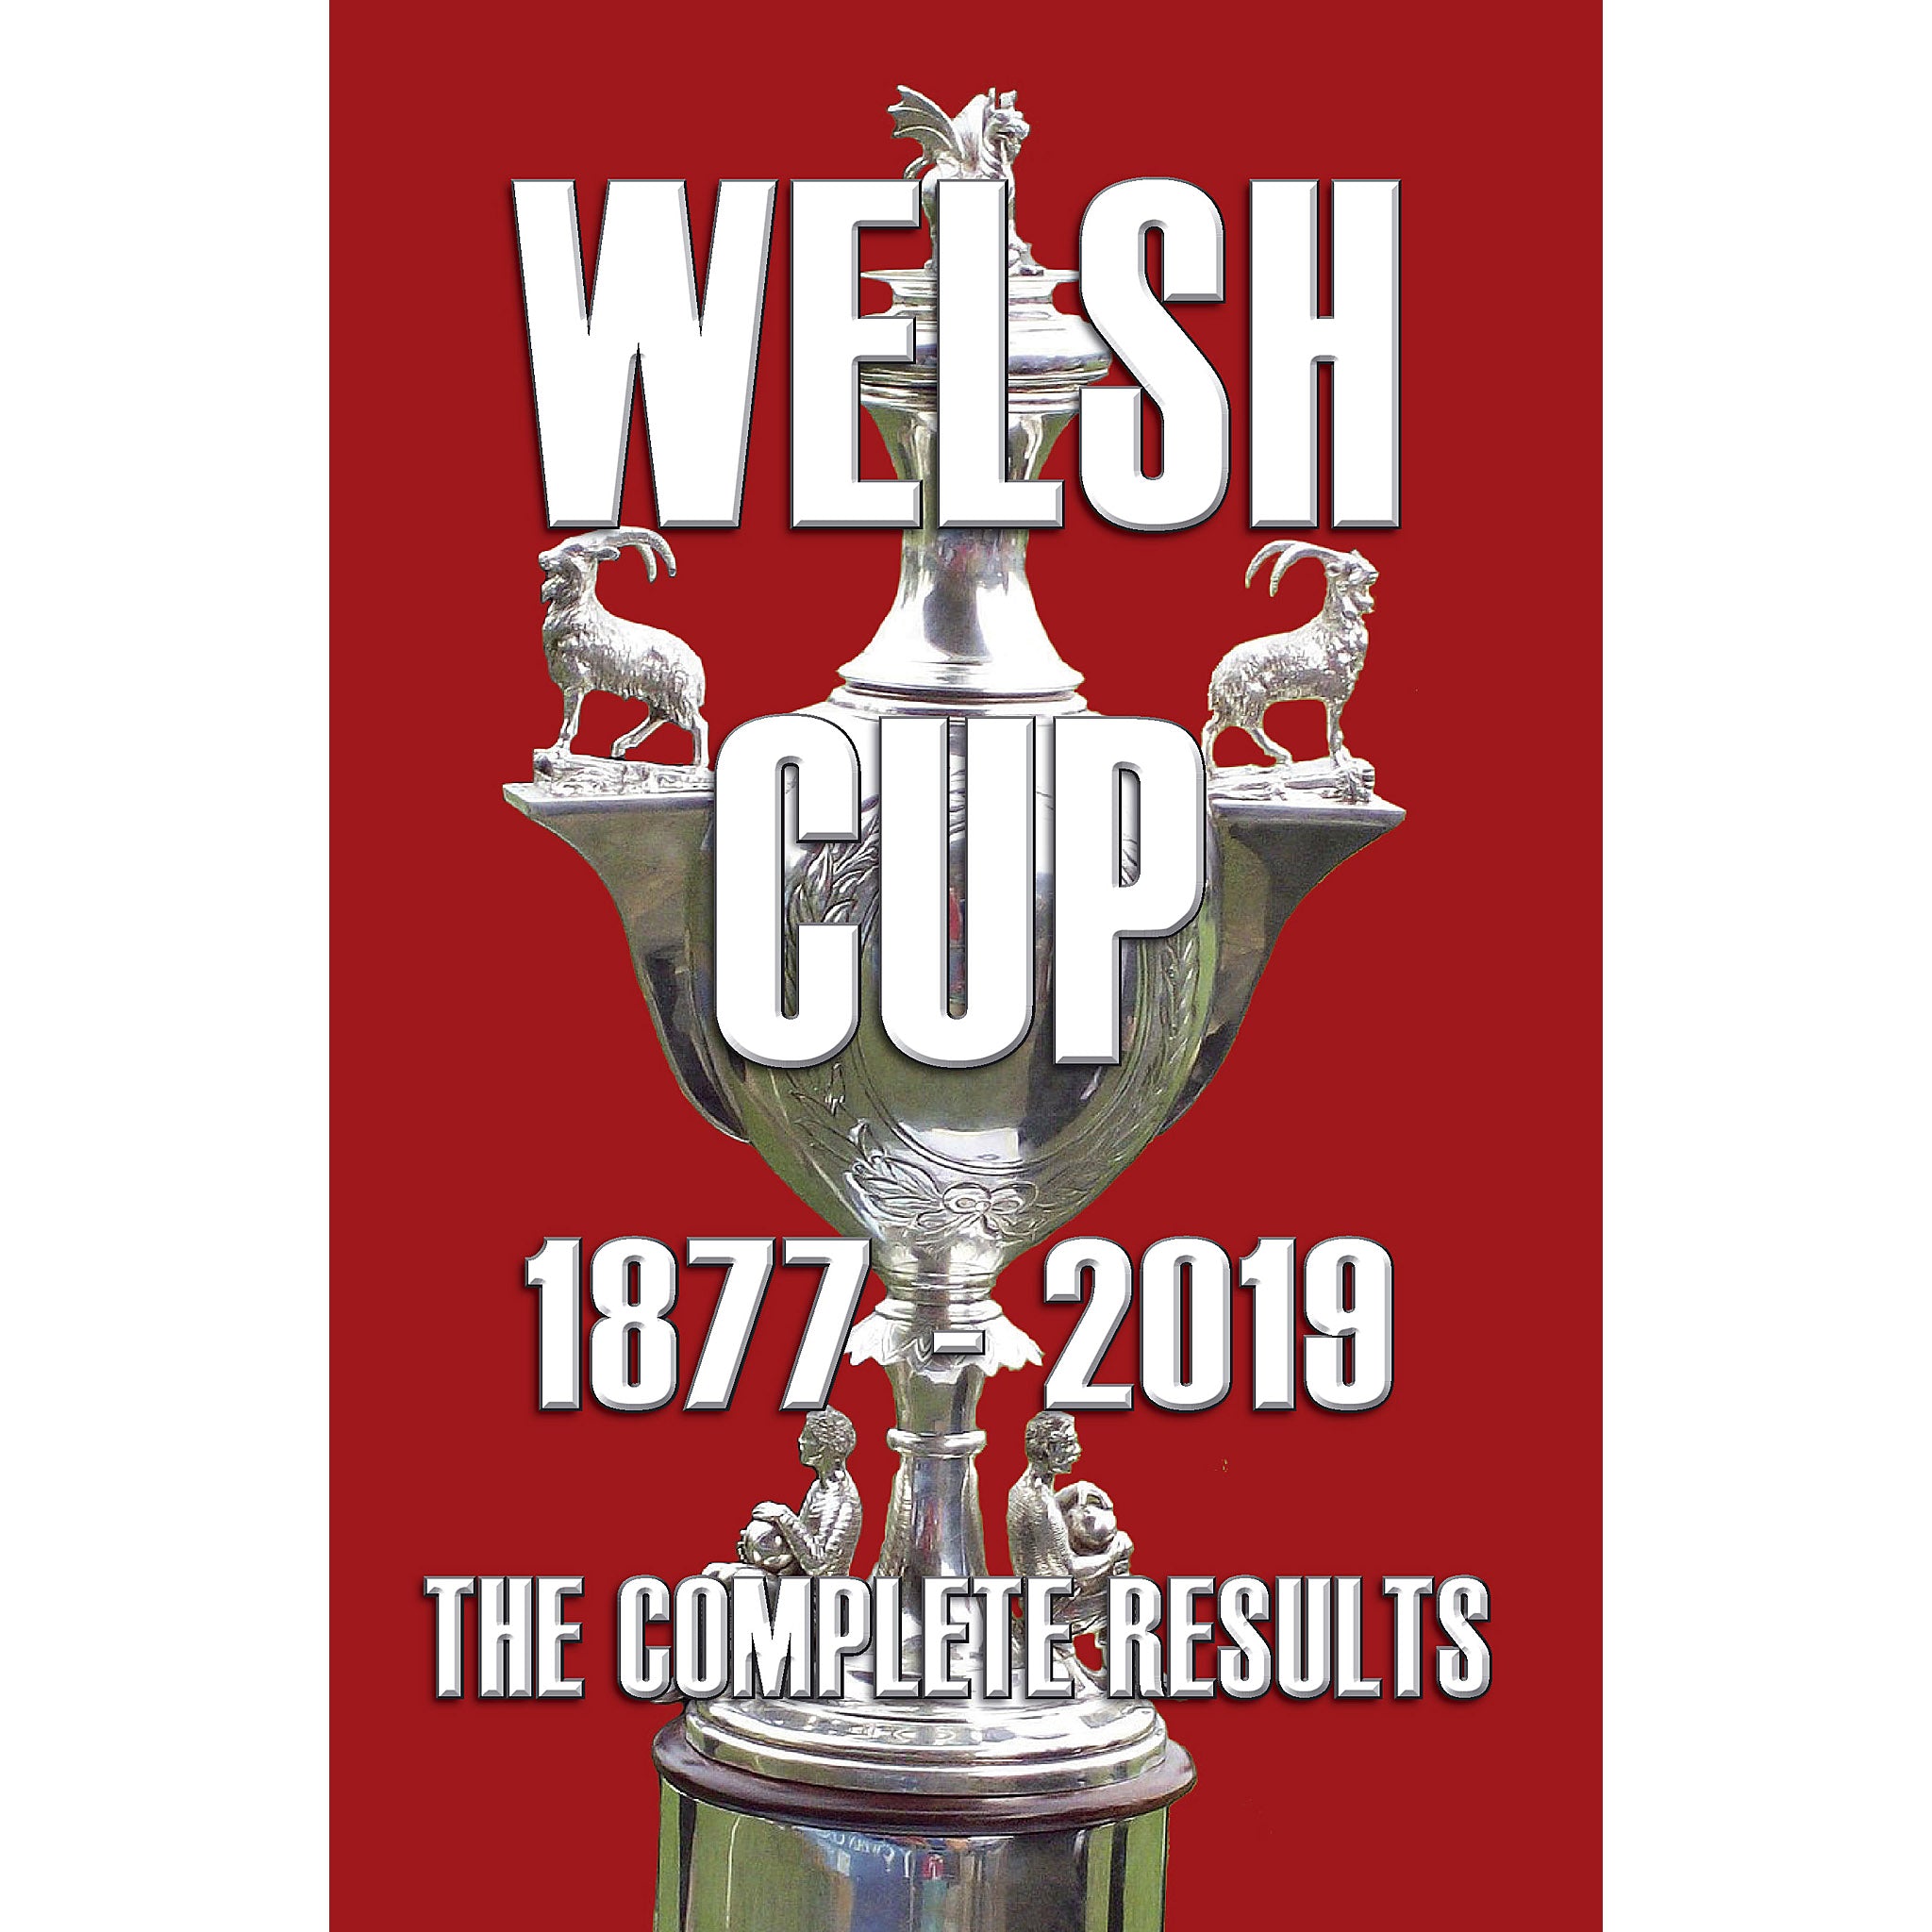 The Welsh Cup 1877-2019 – The Complete Results